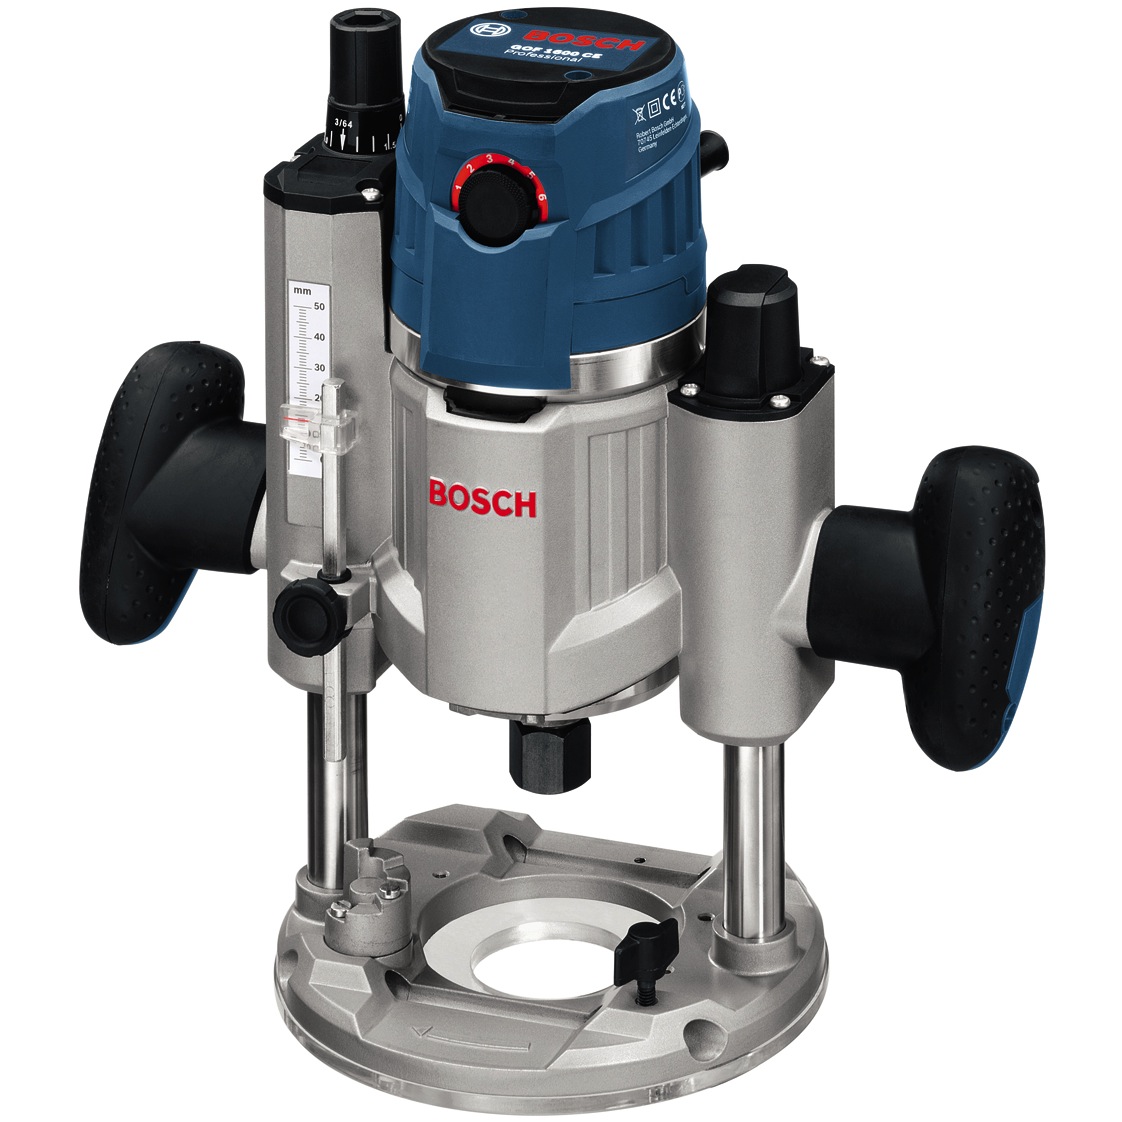 Bosch Variable Speed Router 1600W, Max:25000rpm, 6kg GOF1600CE